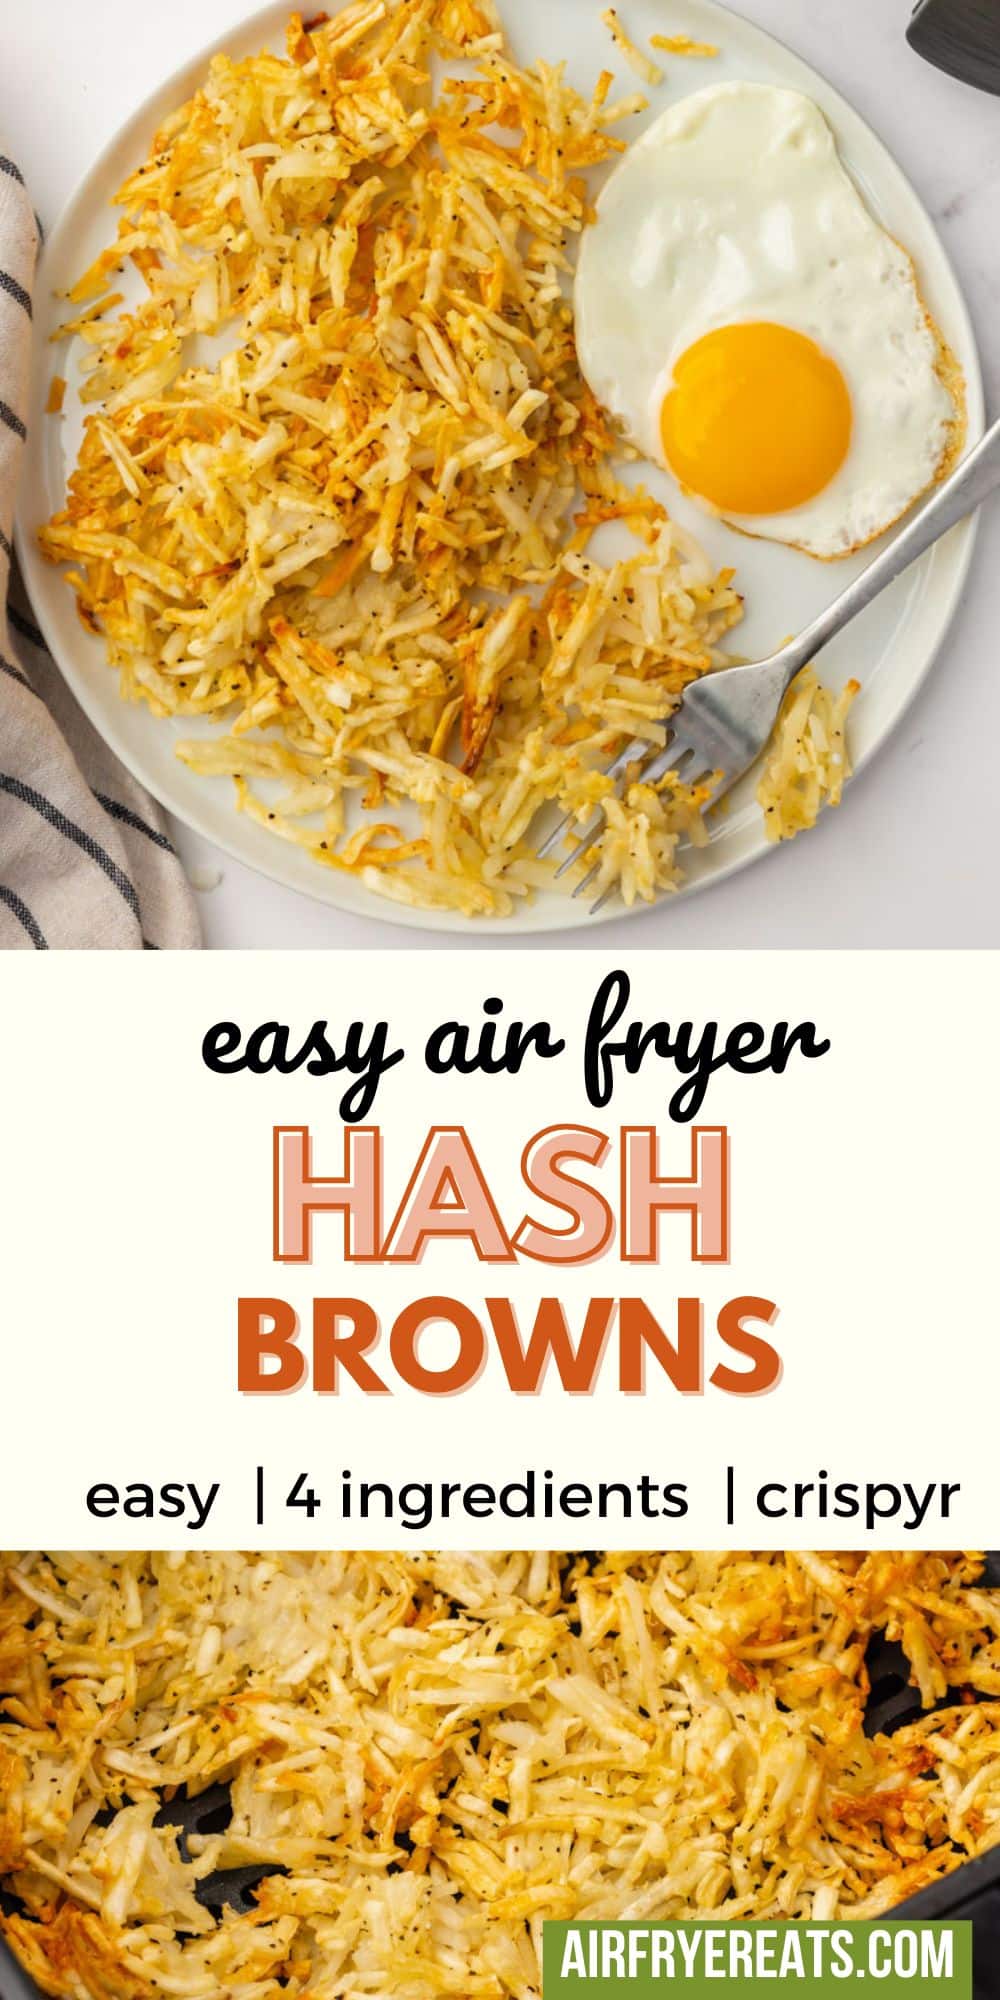 Shredded frozen potatoes become the most amazing crispy Air Fryer Hashbrowns in under 20 minutes and with only a tablespoon of oil! via @vegetarianmamma